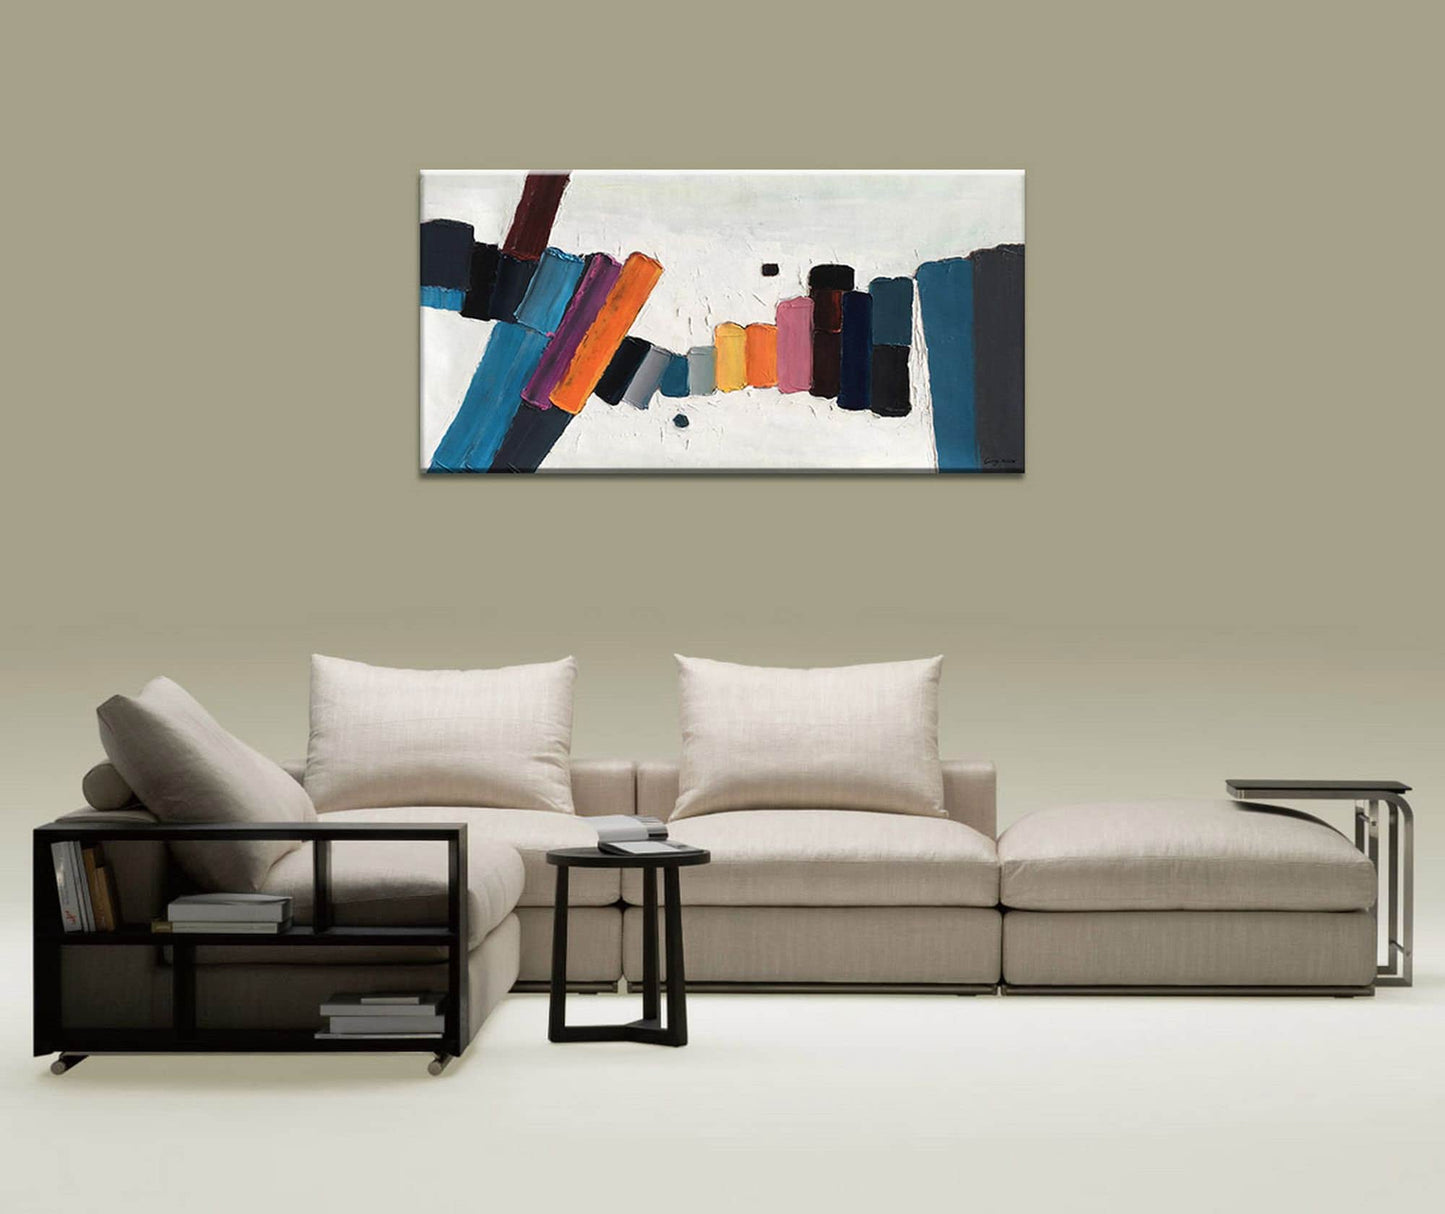 Abstract Painting Minimalist Black And White, Canvas Wall Art, Oil Painting, Large Canvas Art, Modern Painting, Impasto Oil Painting